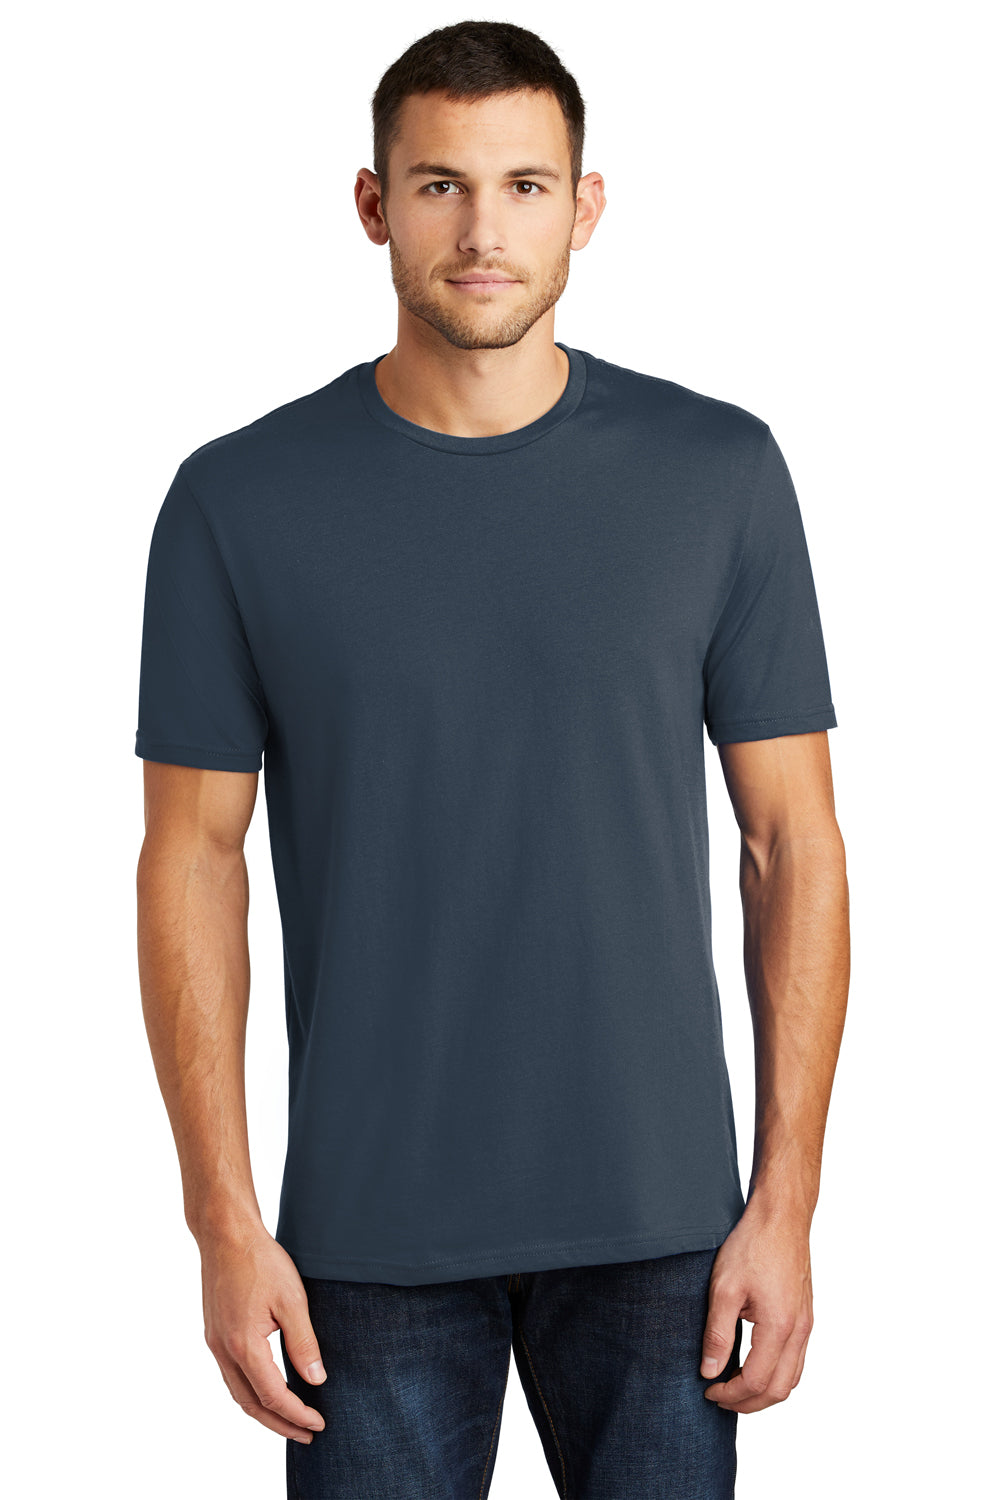 District DT104 Mens Perfect Weight Short Sleeve Crewneck T-Shirt Navy Blue Front